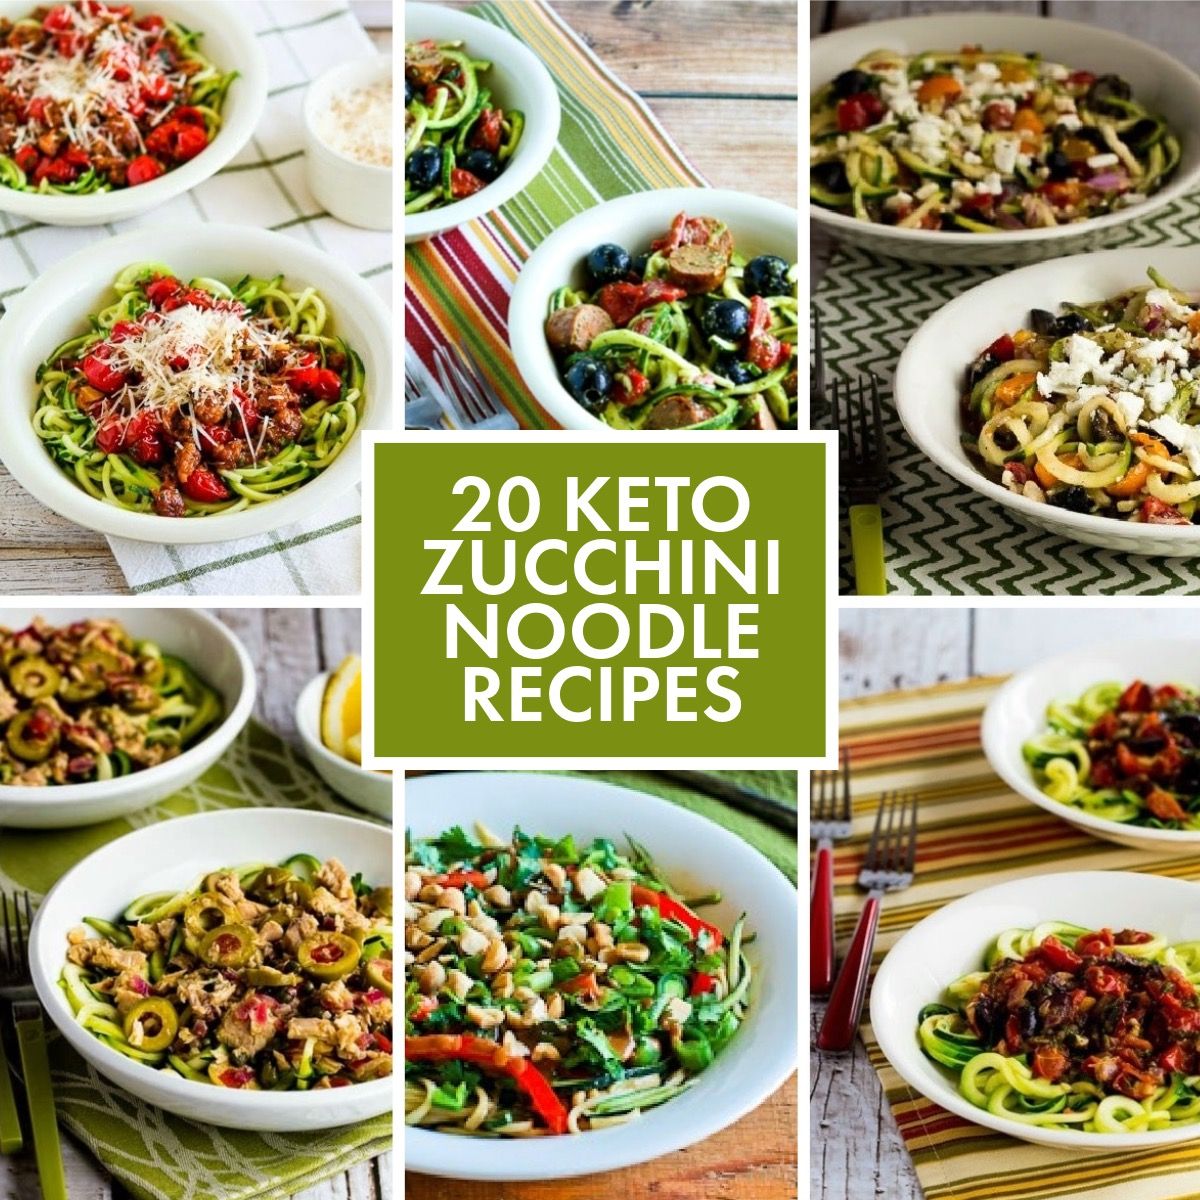 Text overlay collage for 20 Keto Zucchini Noodle Recipes showing featured recipes.